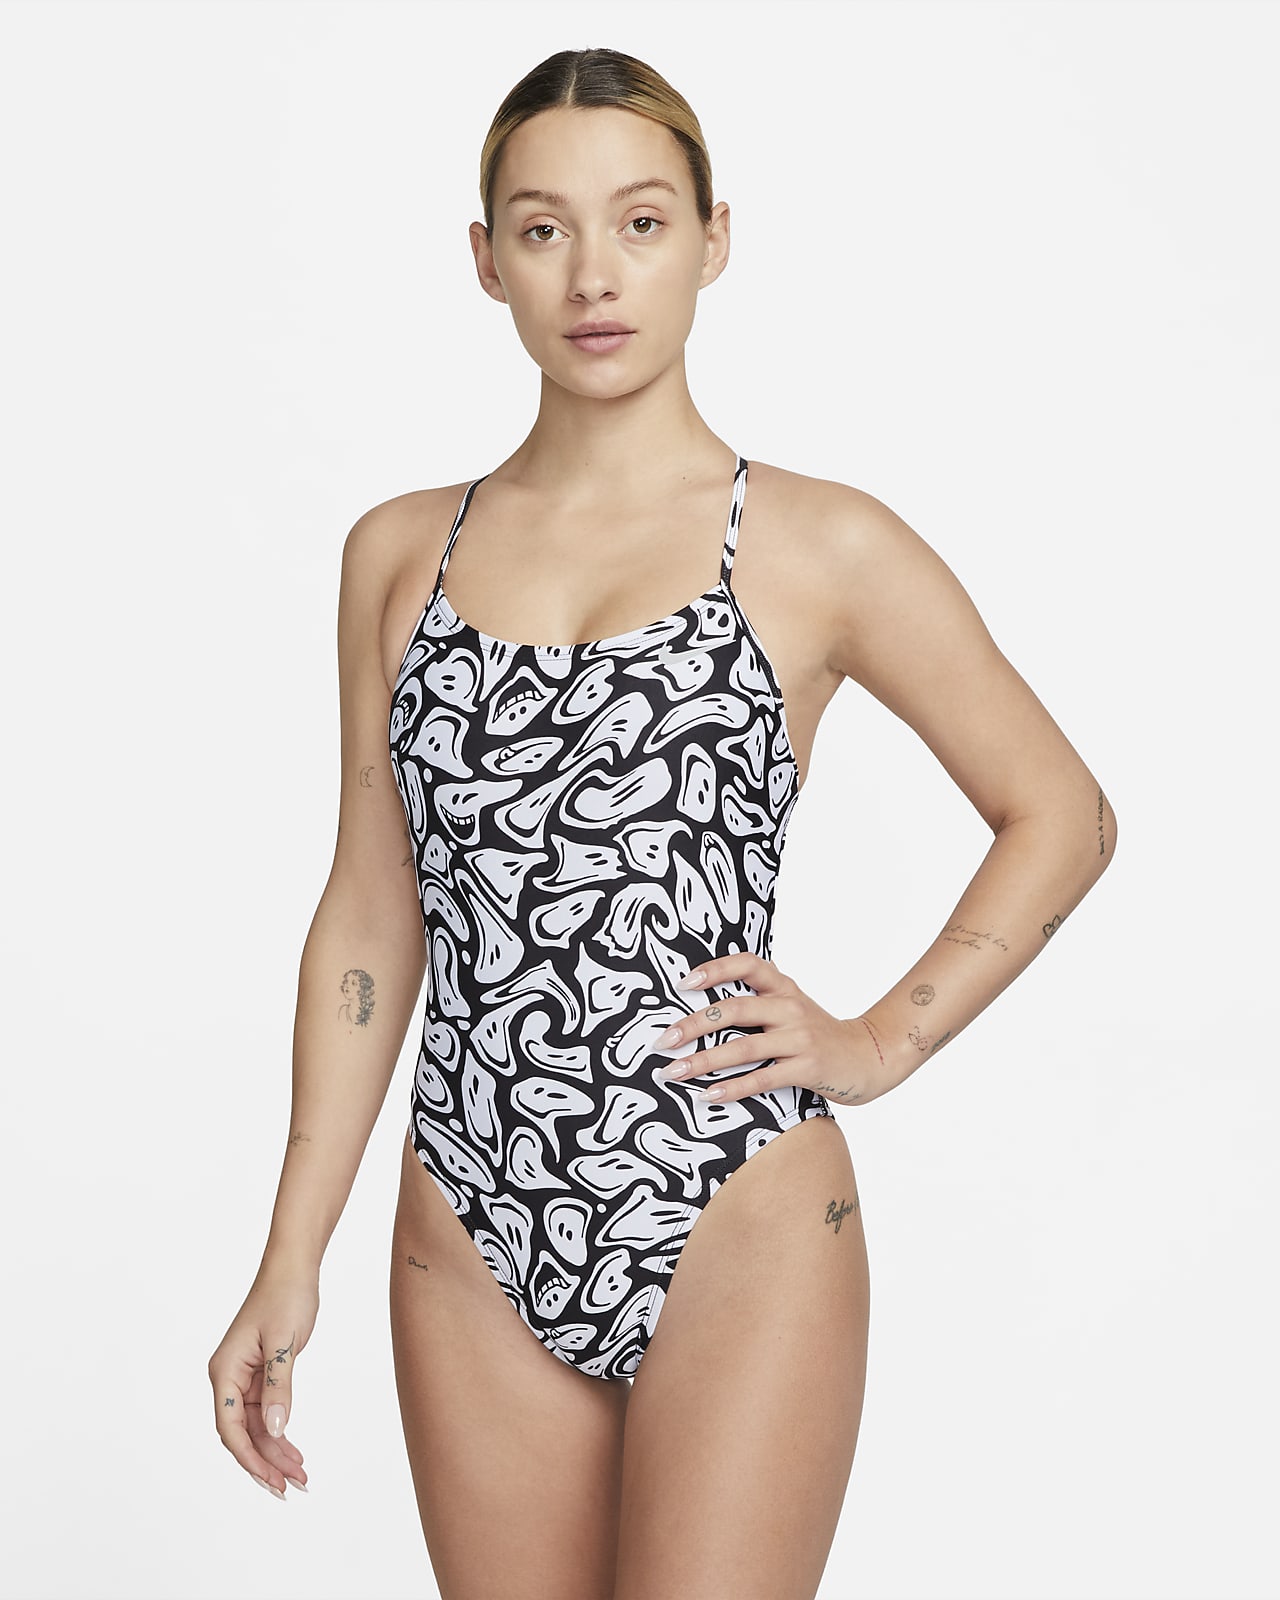 Women's Black Cut Out Back Cheeky One Piece Swimsuit